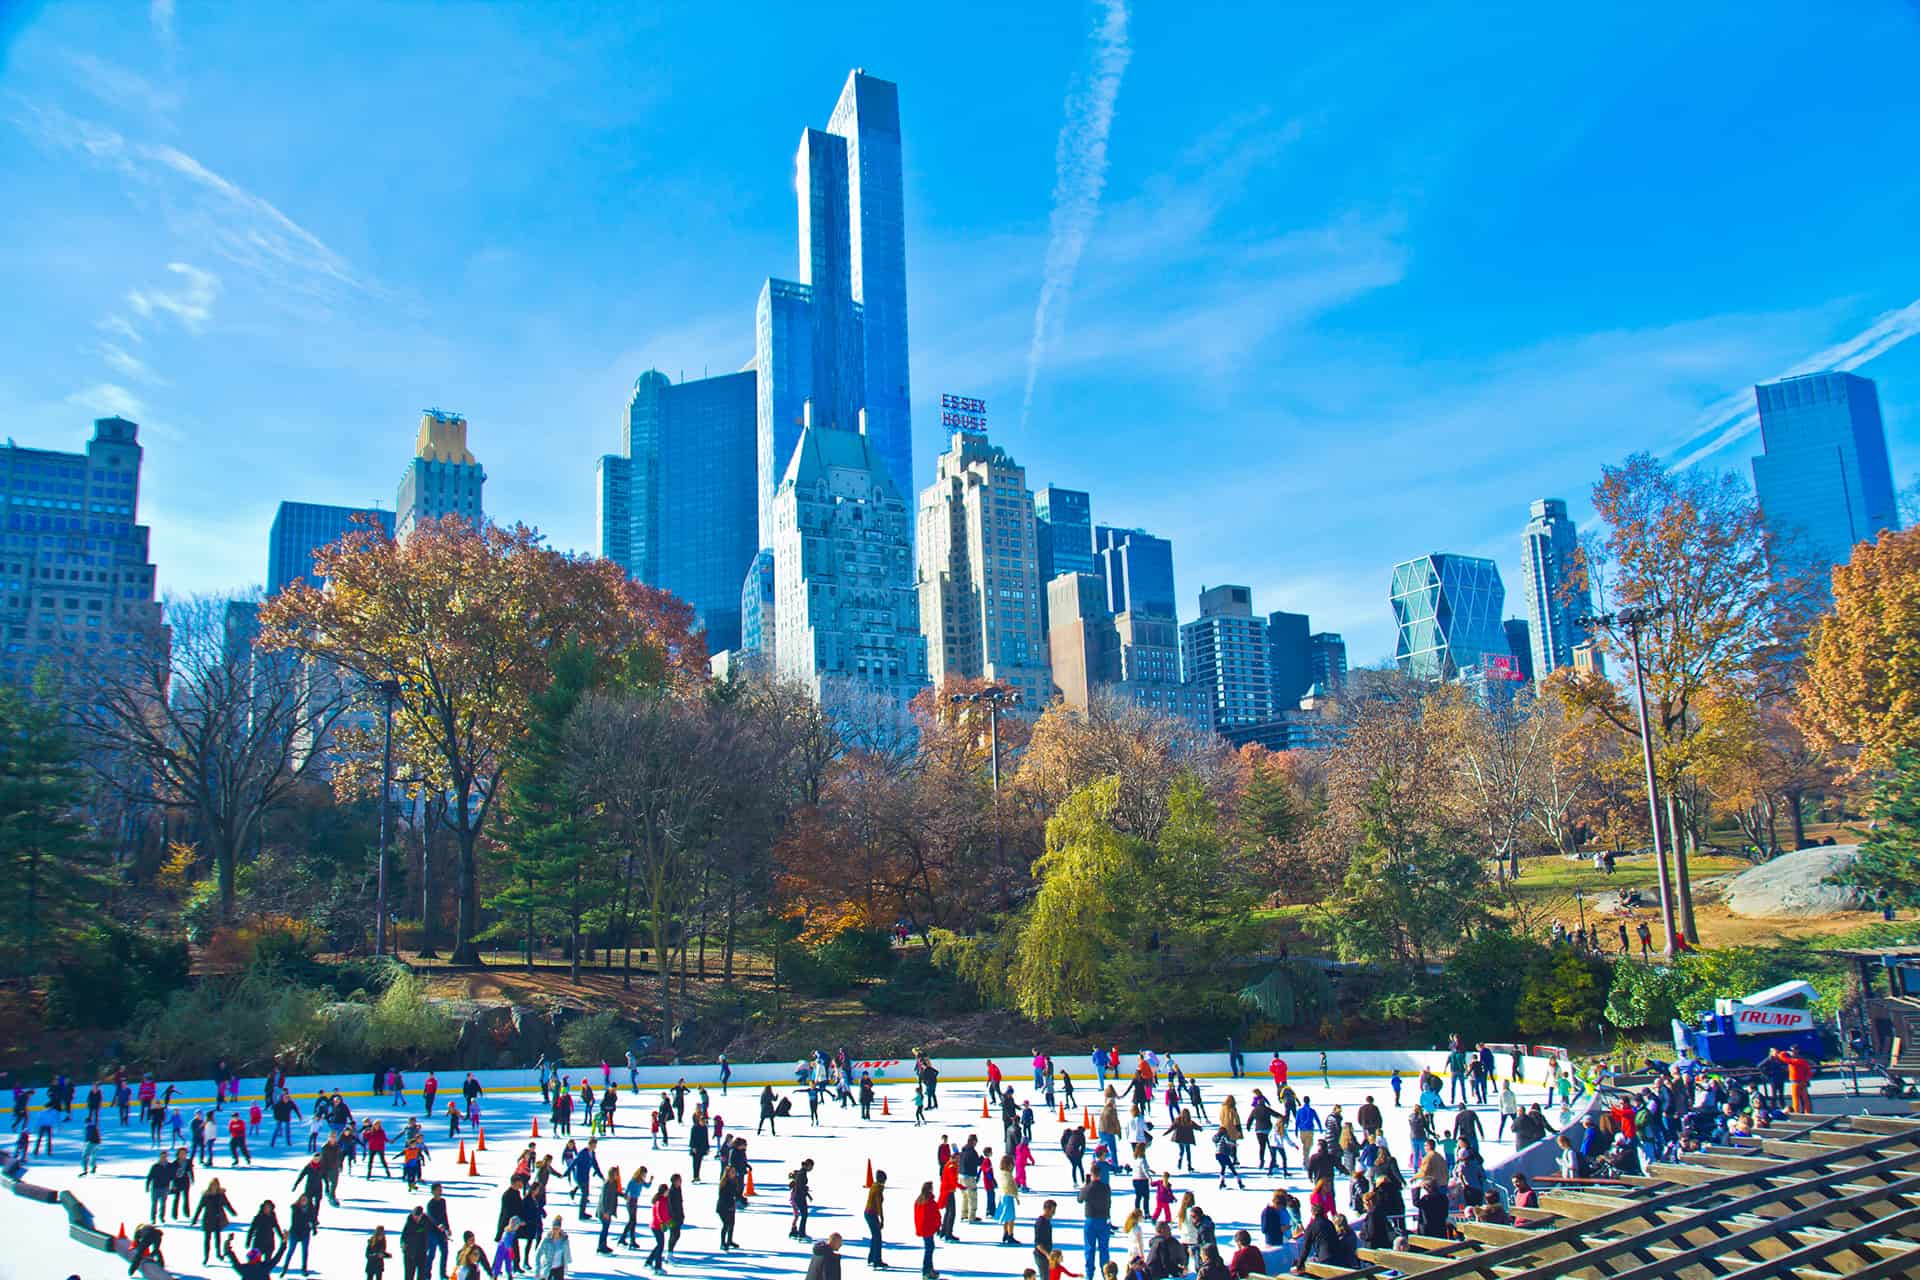 ice rink new york central park